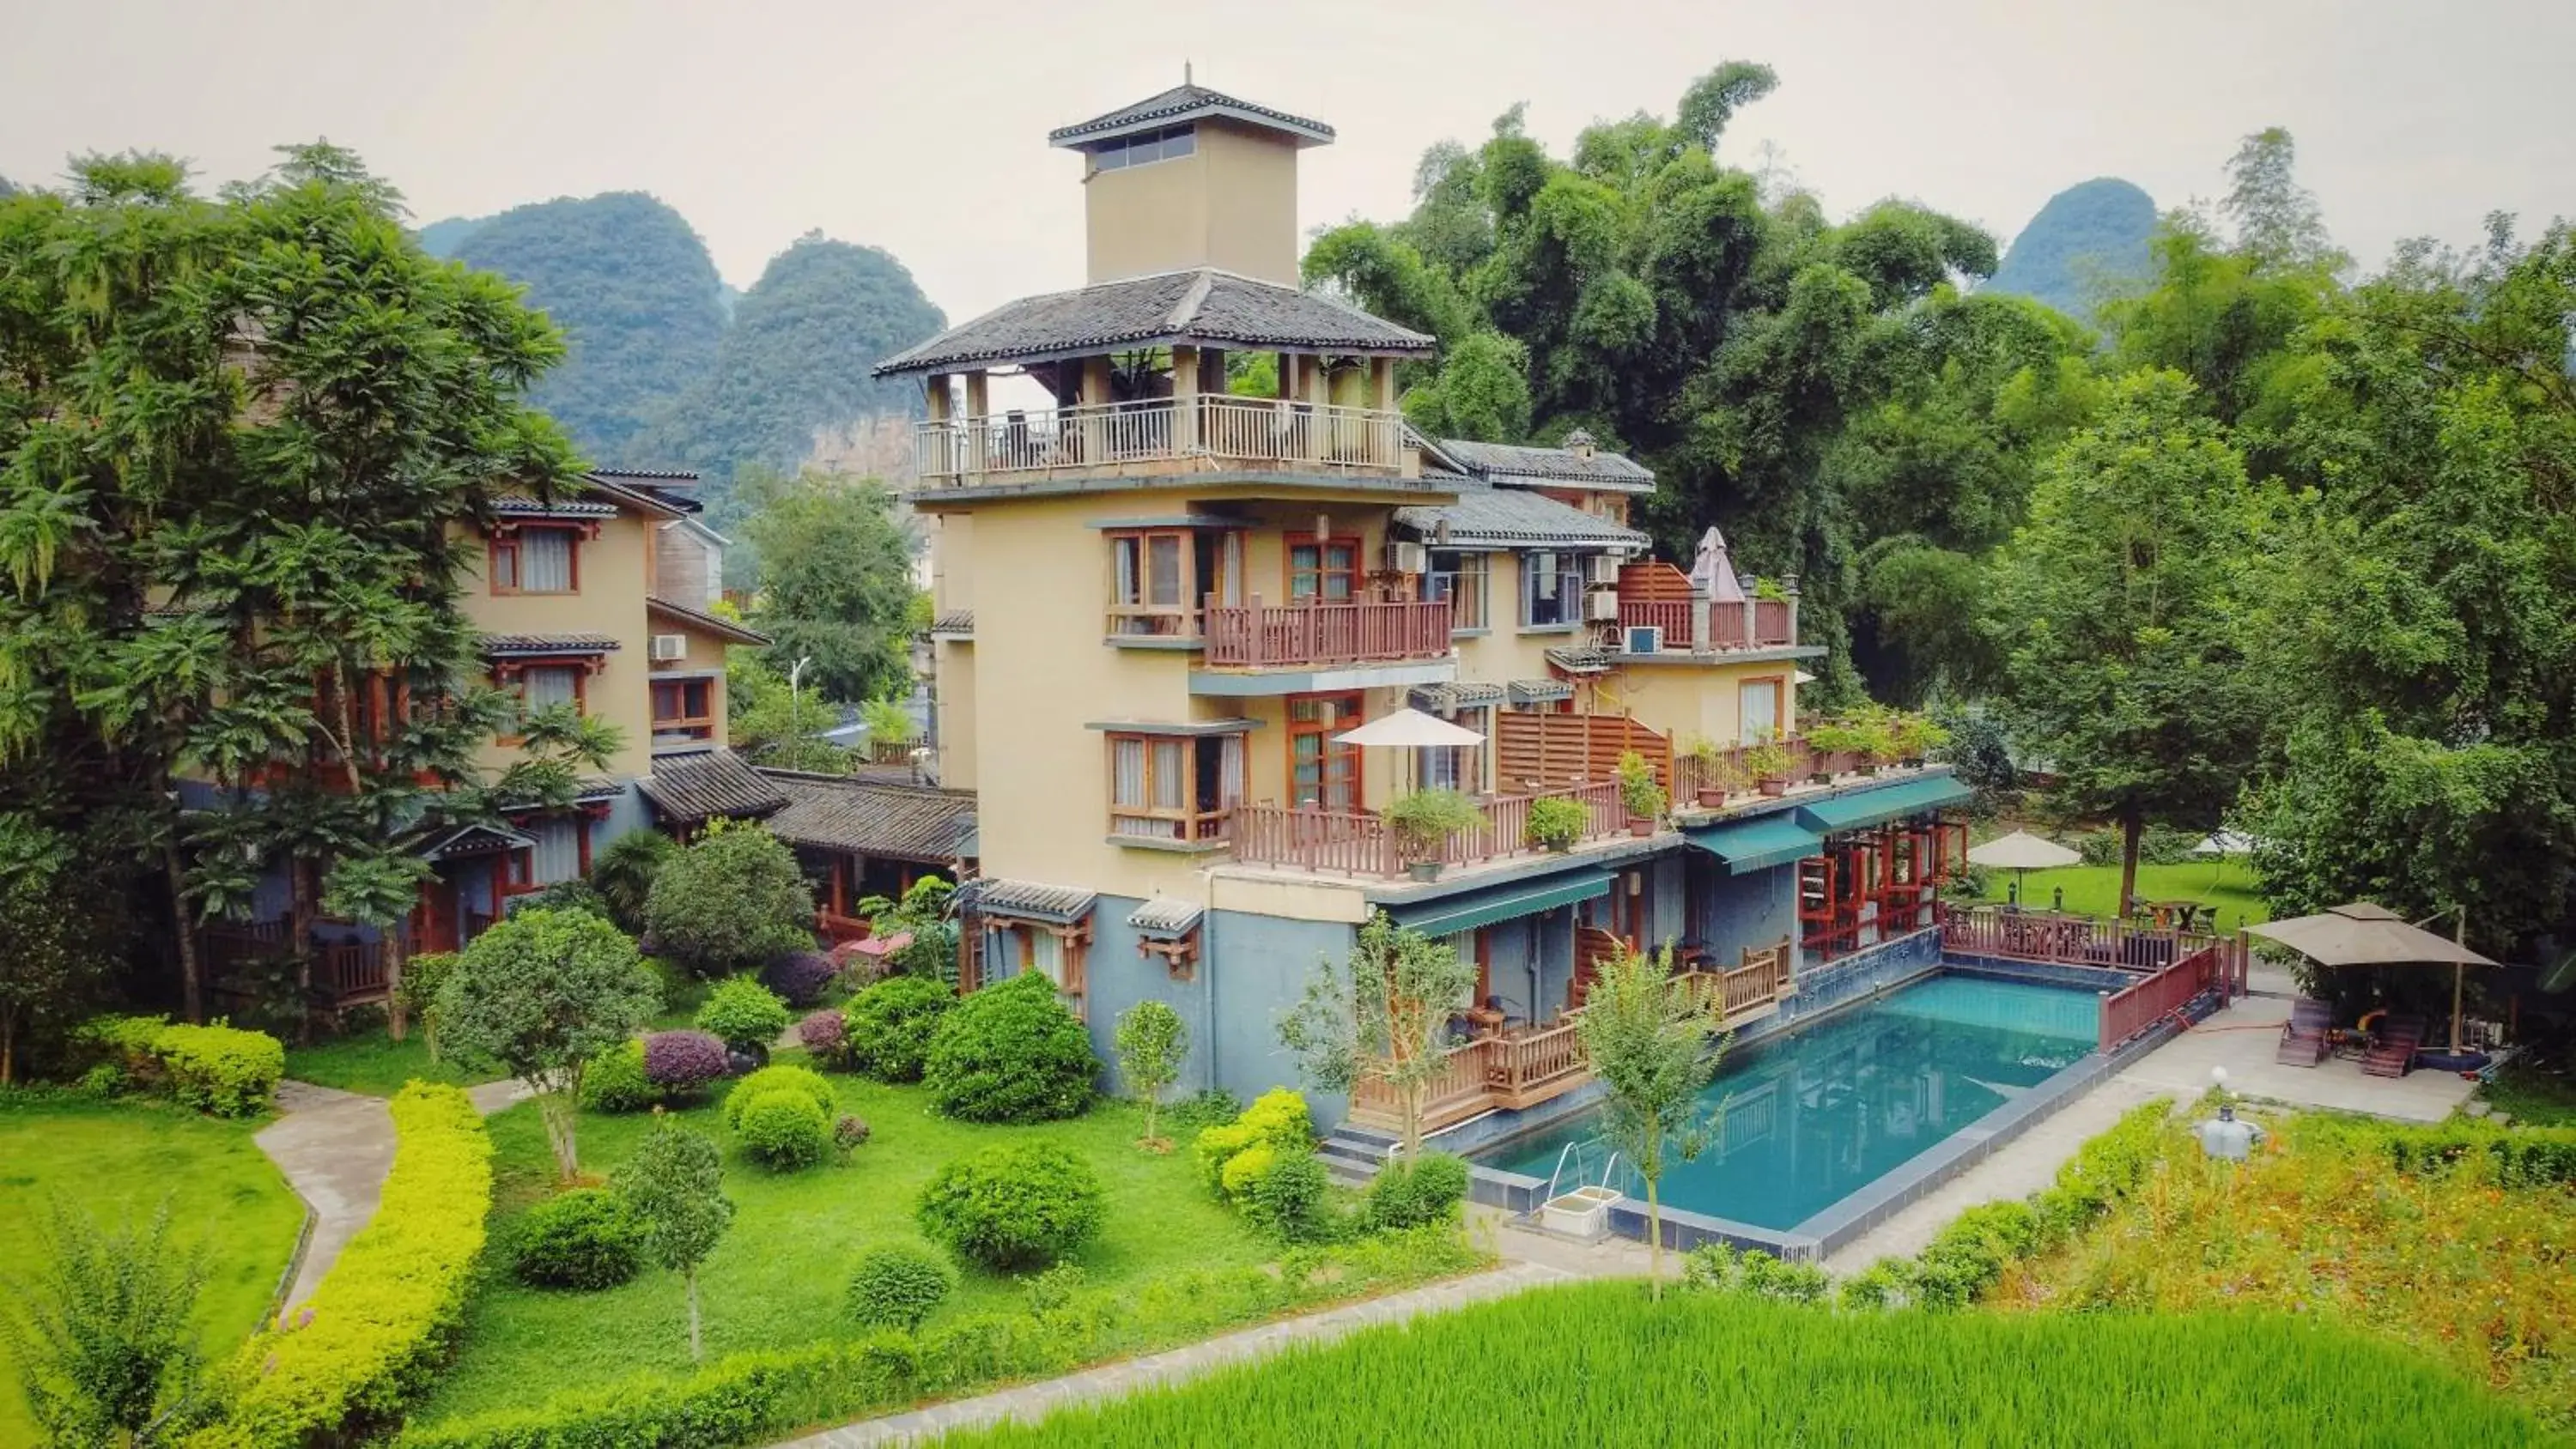 Property building, Pool View in Yangshuo Moondance Hotel